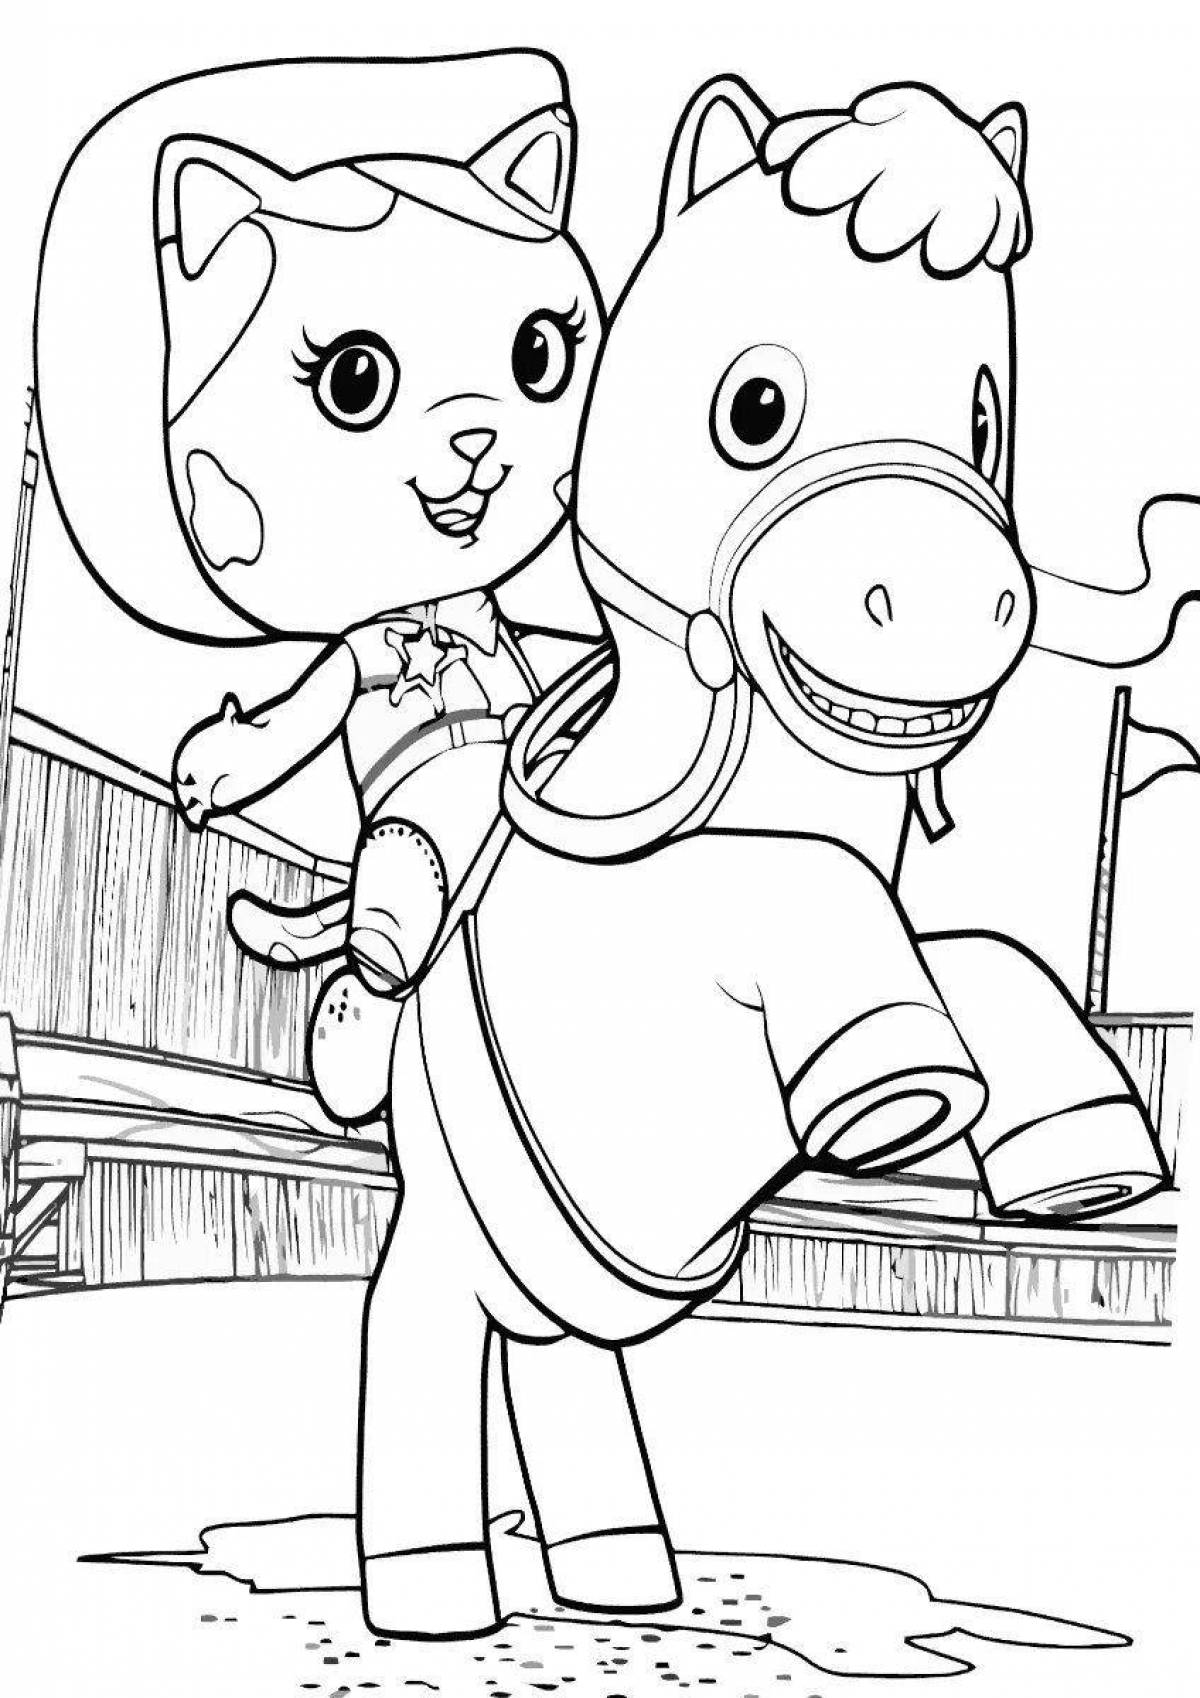 Fearless sheriff coloring page